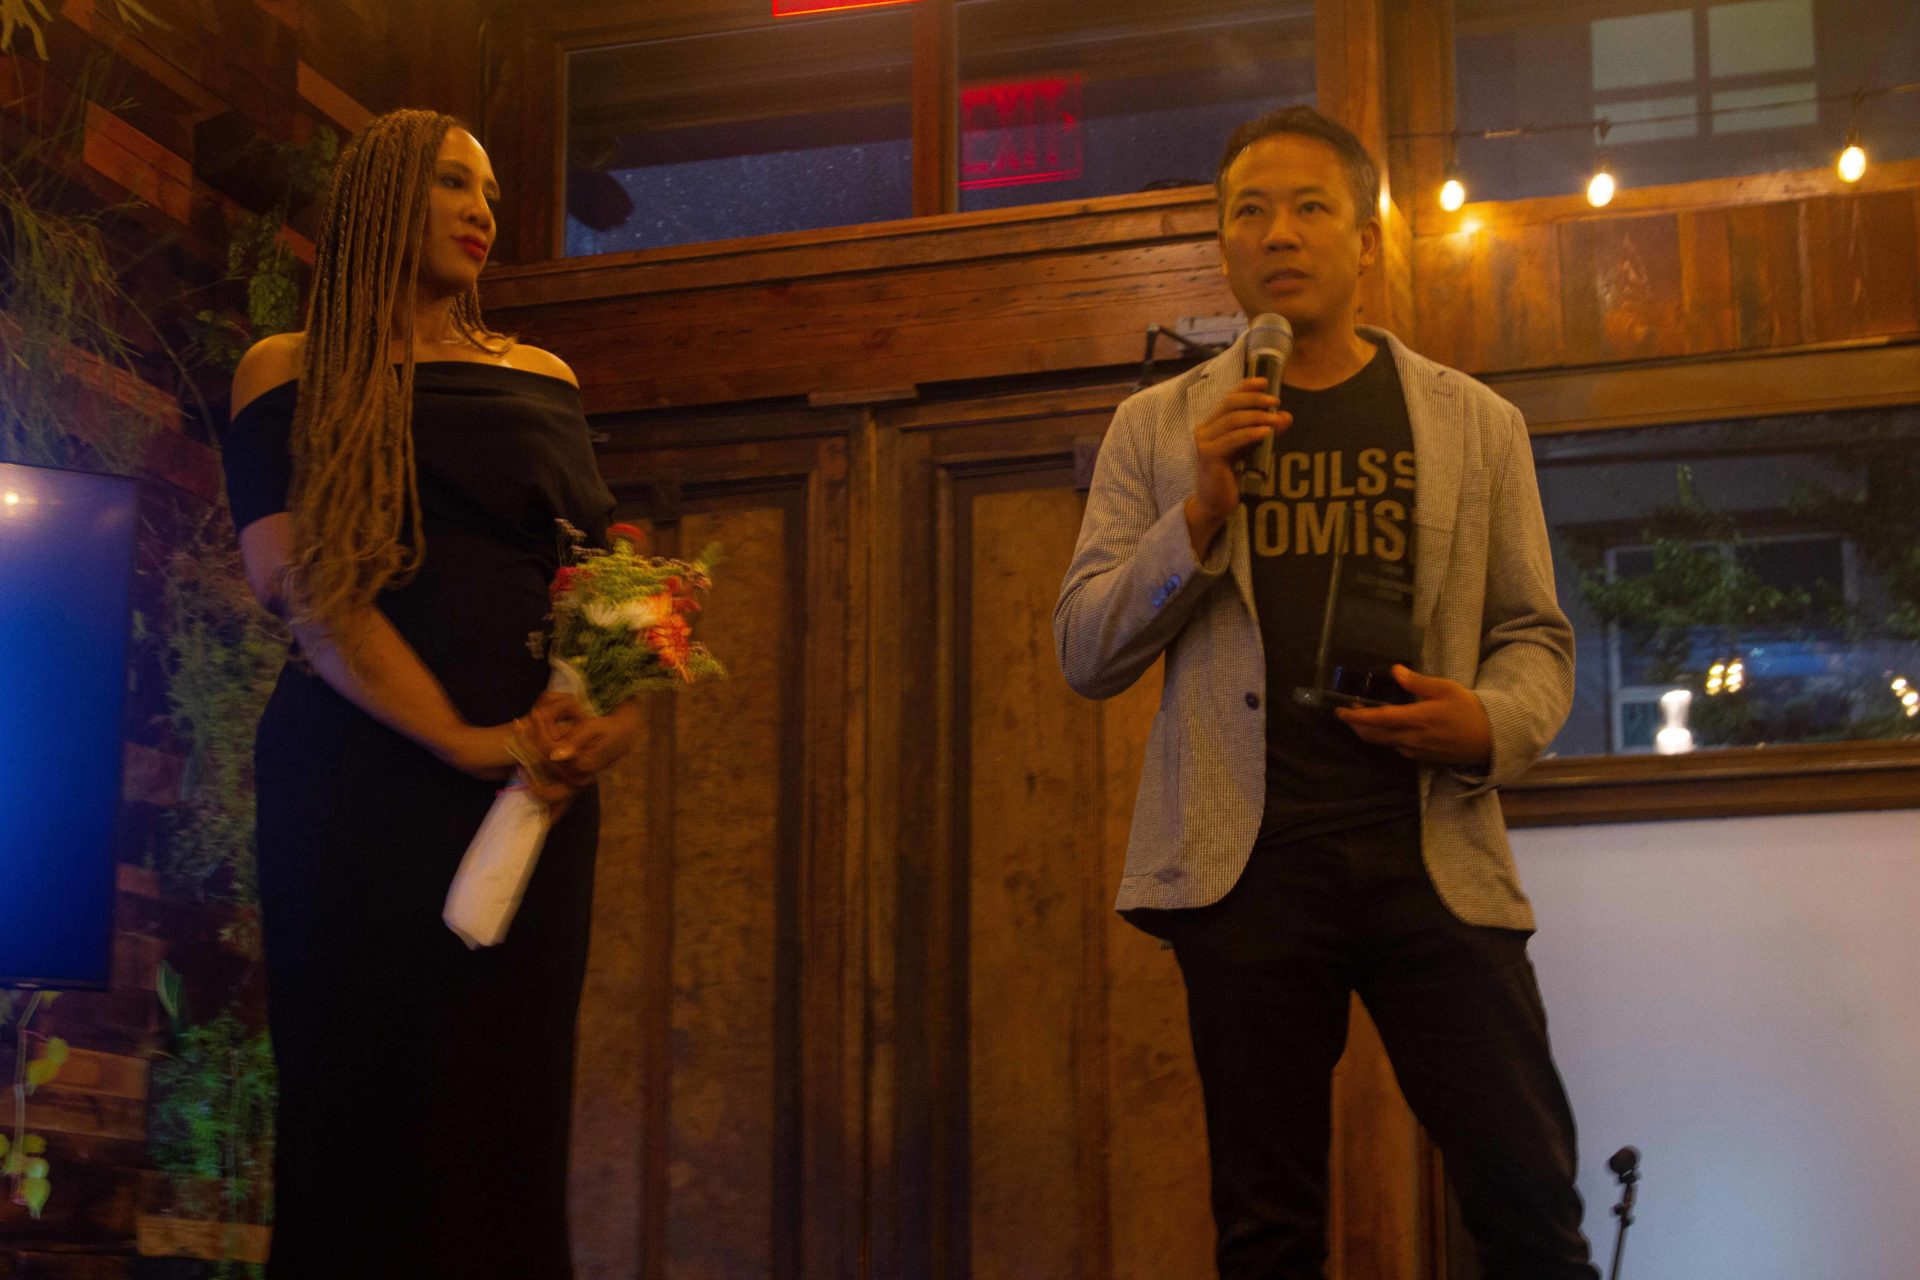 Jim Kwik and Kailee at Summer in the City event